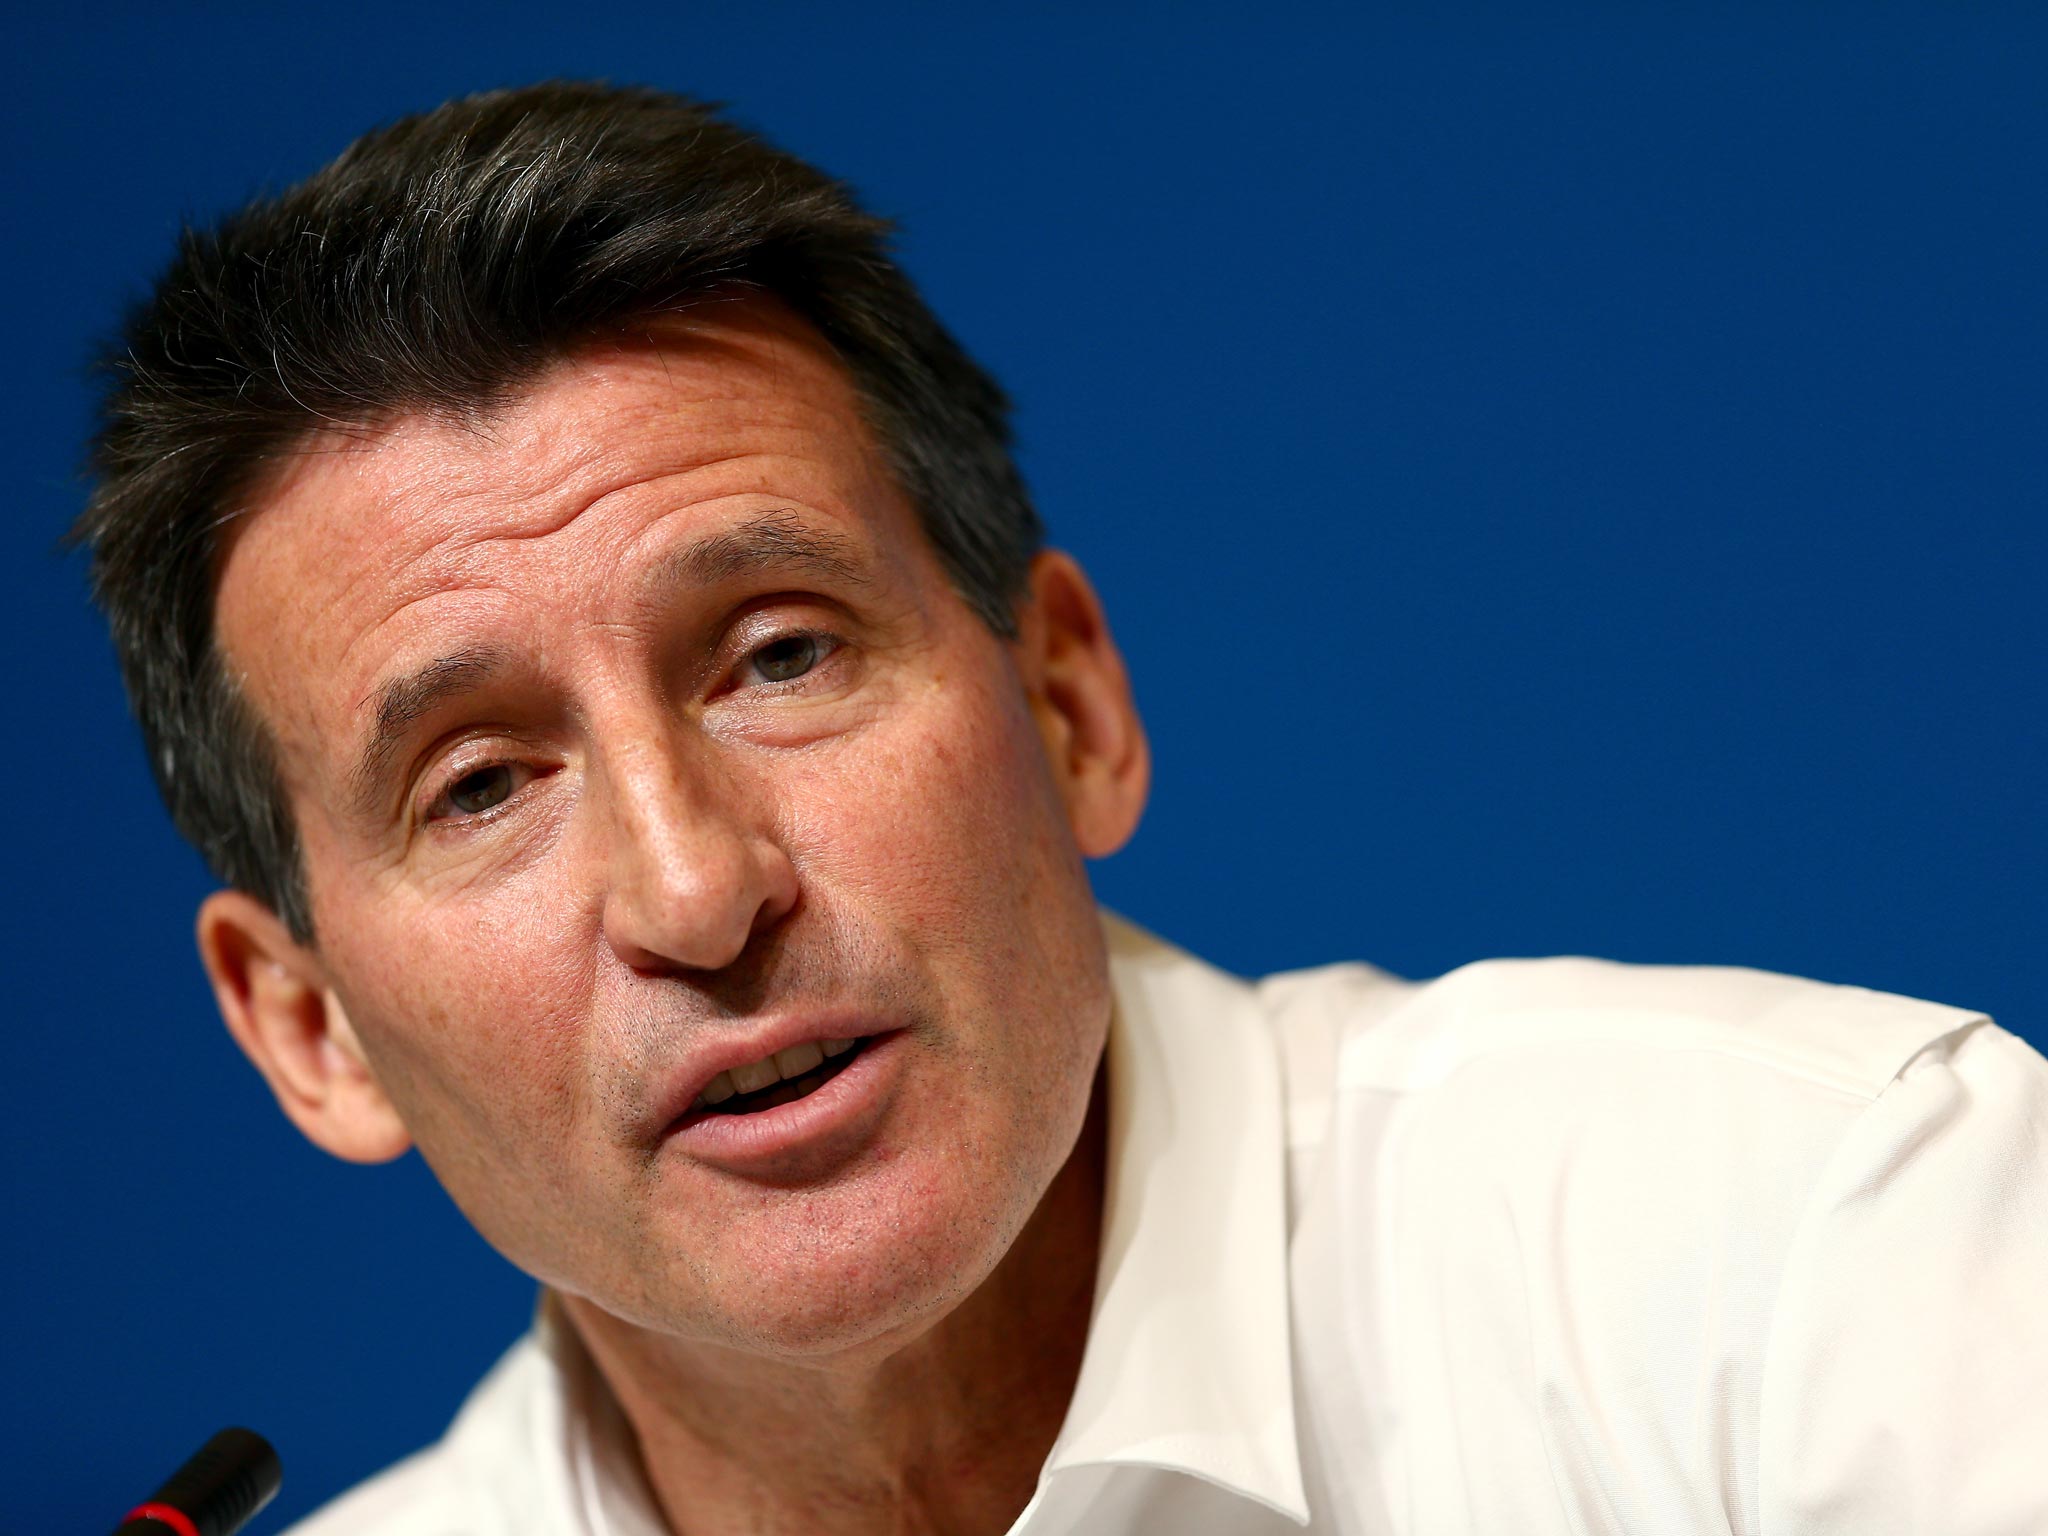 Lord Coe is regarded as ‘a great leader’ by the Mayor of
London, Boris Johnson